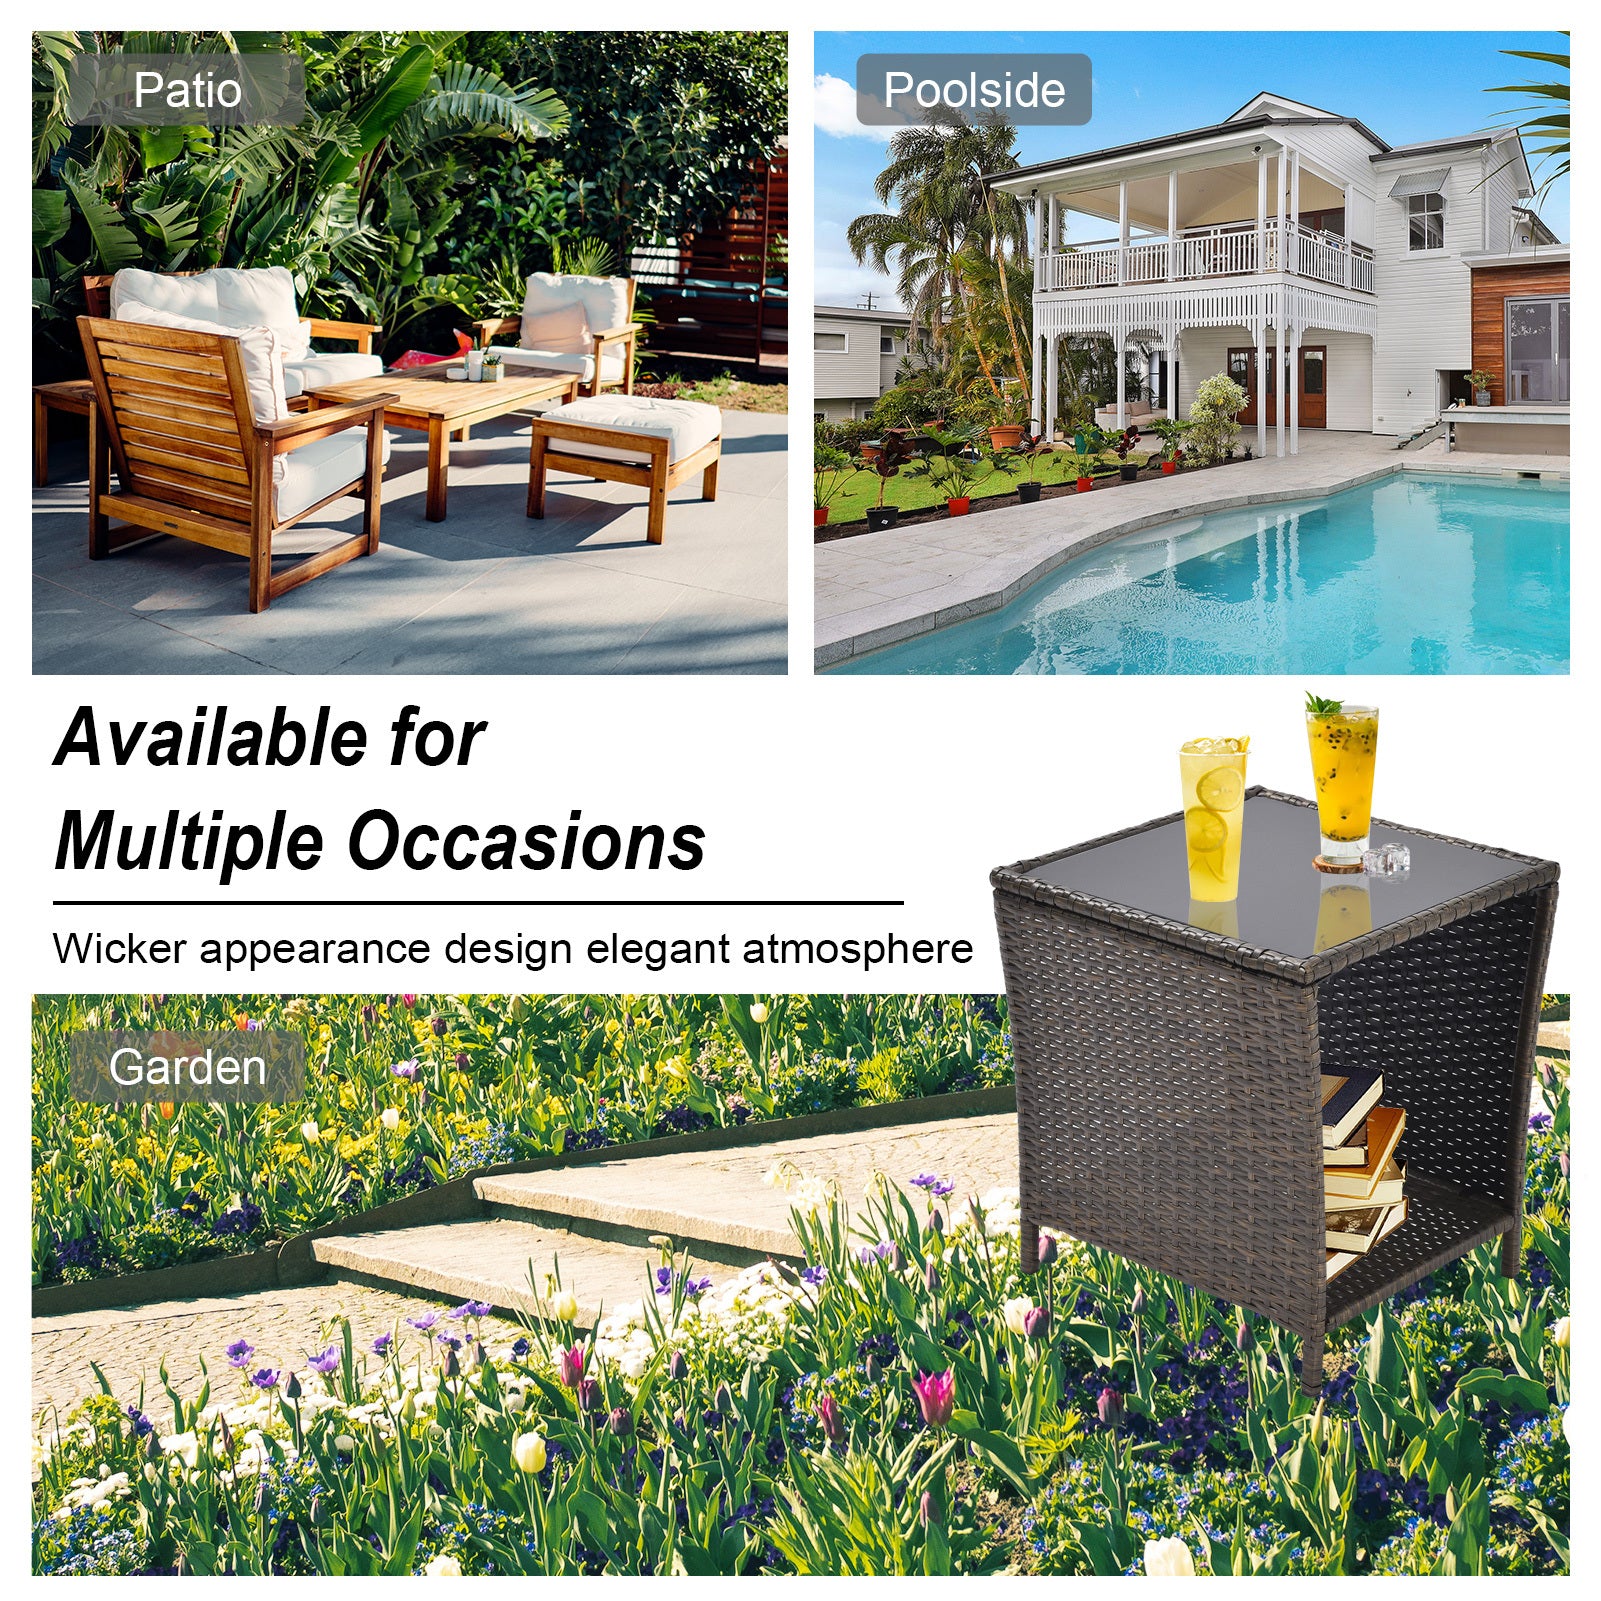 Outdoor Side Coffee Table with Storage Shelf,All black+gold-weather resistant frame-garden &